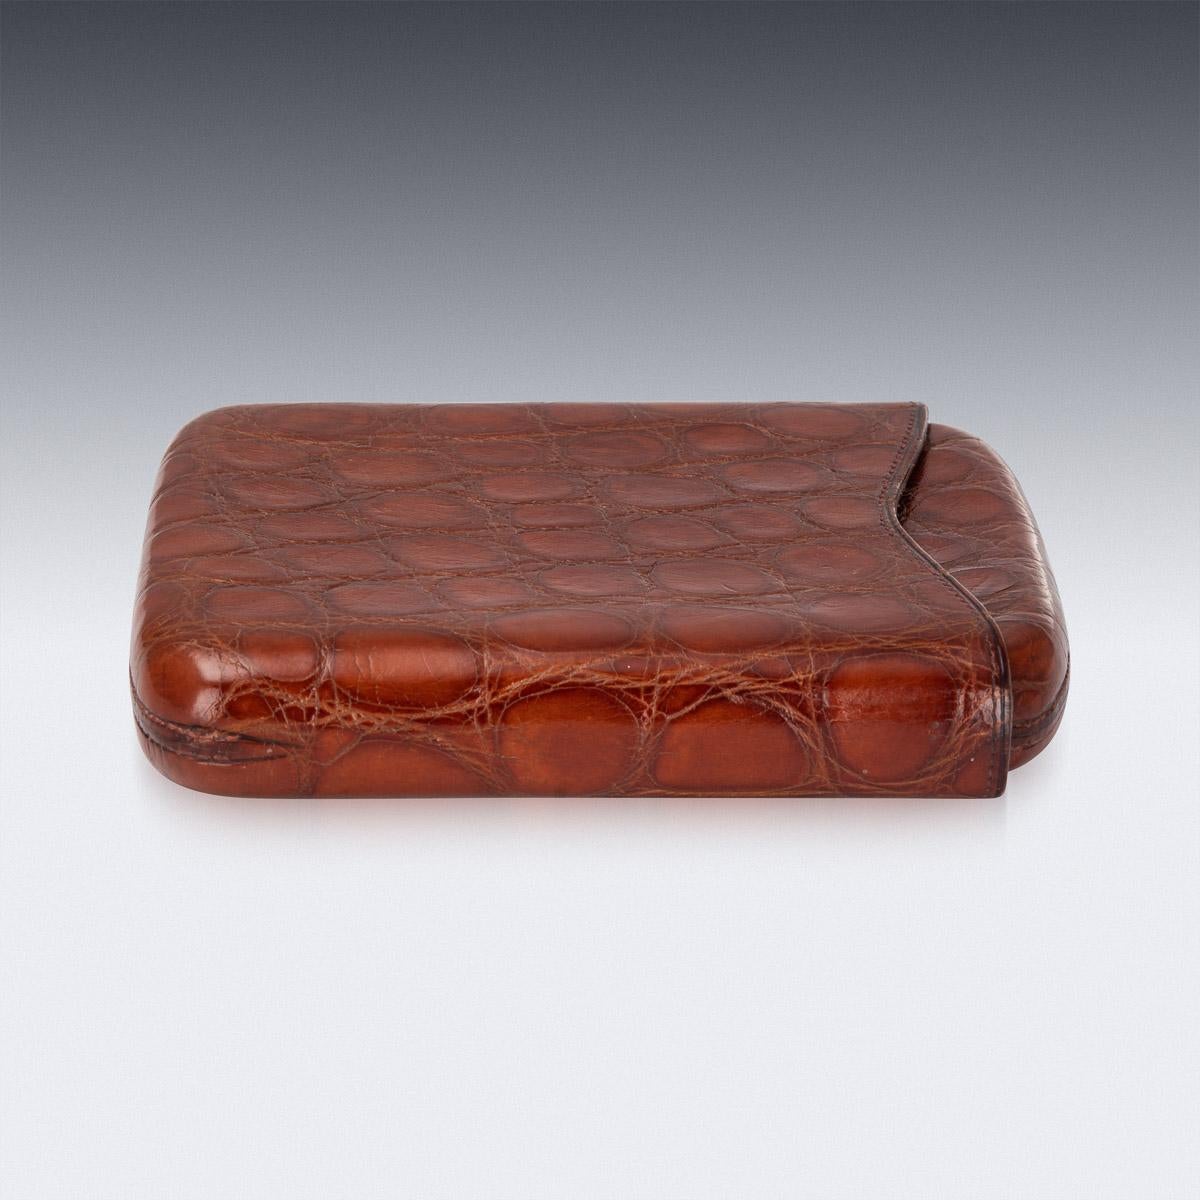 Stylish early-20th century British made sumptuous crocodile leather cigar case, of rounded rectangular form, with a pull off lid and interior that is sufficient for five mid-size cigars.

Measures: Length 13.5cm
Width 10.5 x 2.5cm
Weight 110g.